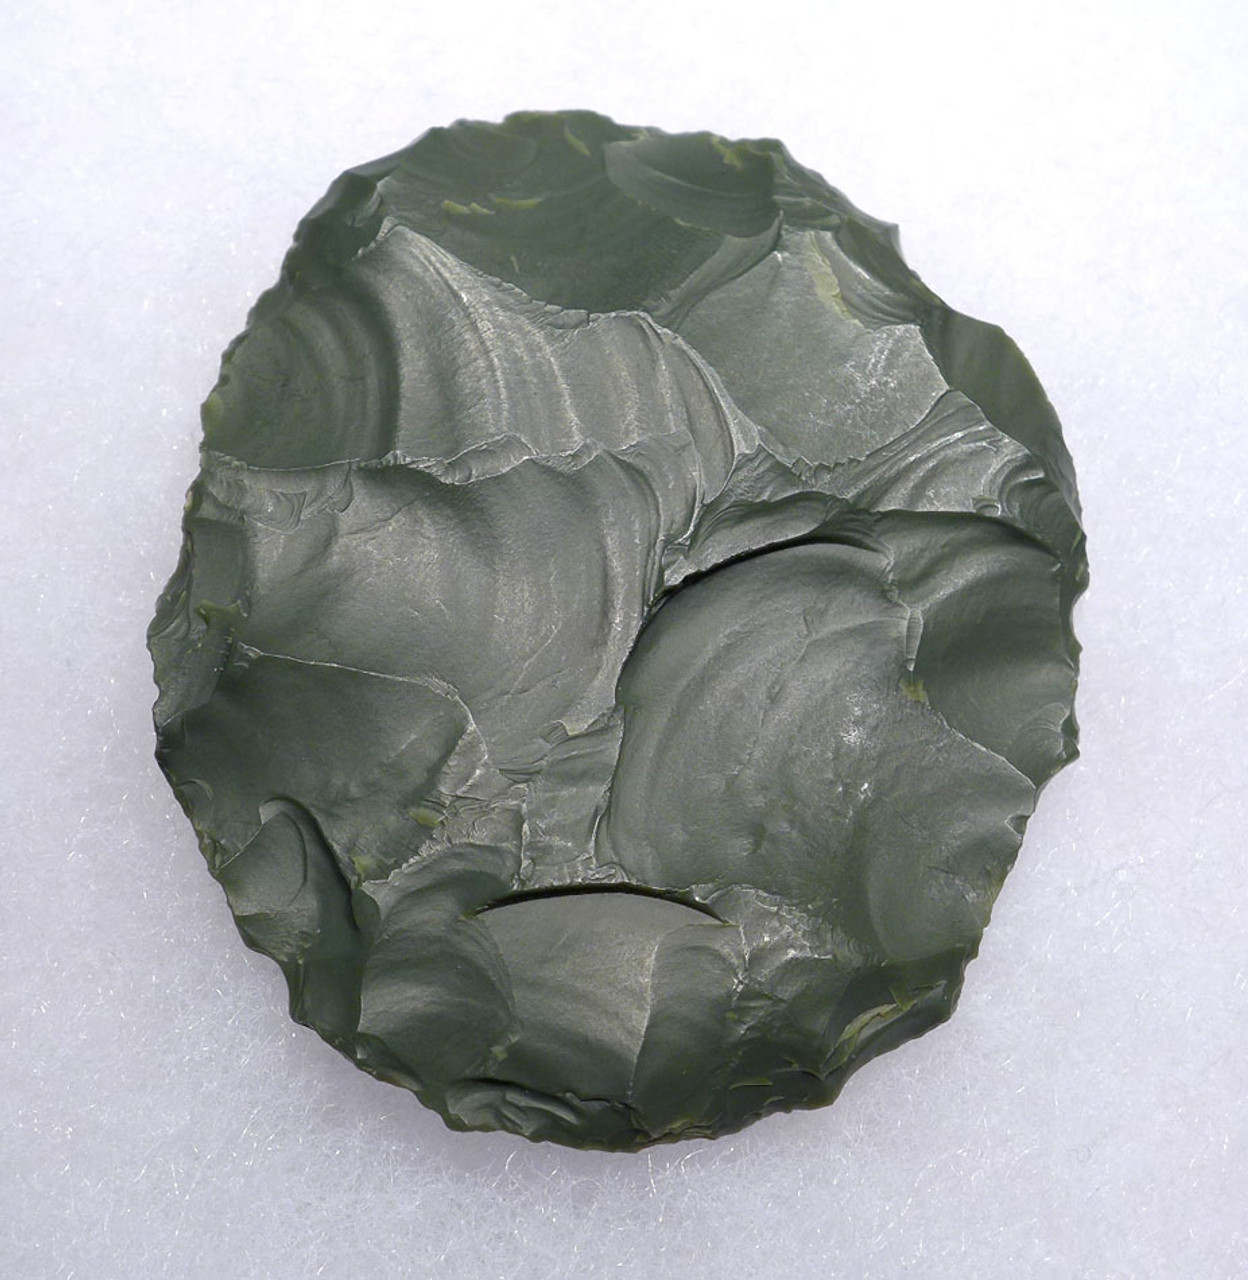 EXCEPTIONAL TENERIAN AFRICAN NEOLITHIC GREEN JASPER DISK SCRAPER FROM THE PEOPLE OF THE GREEN SAHARA *CAP239